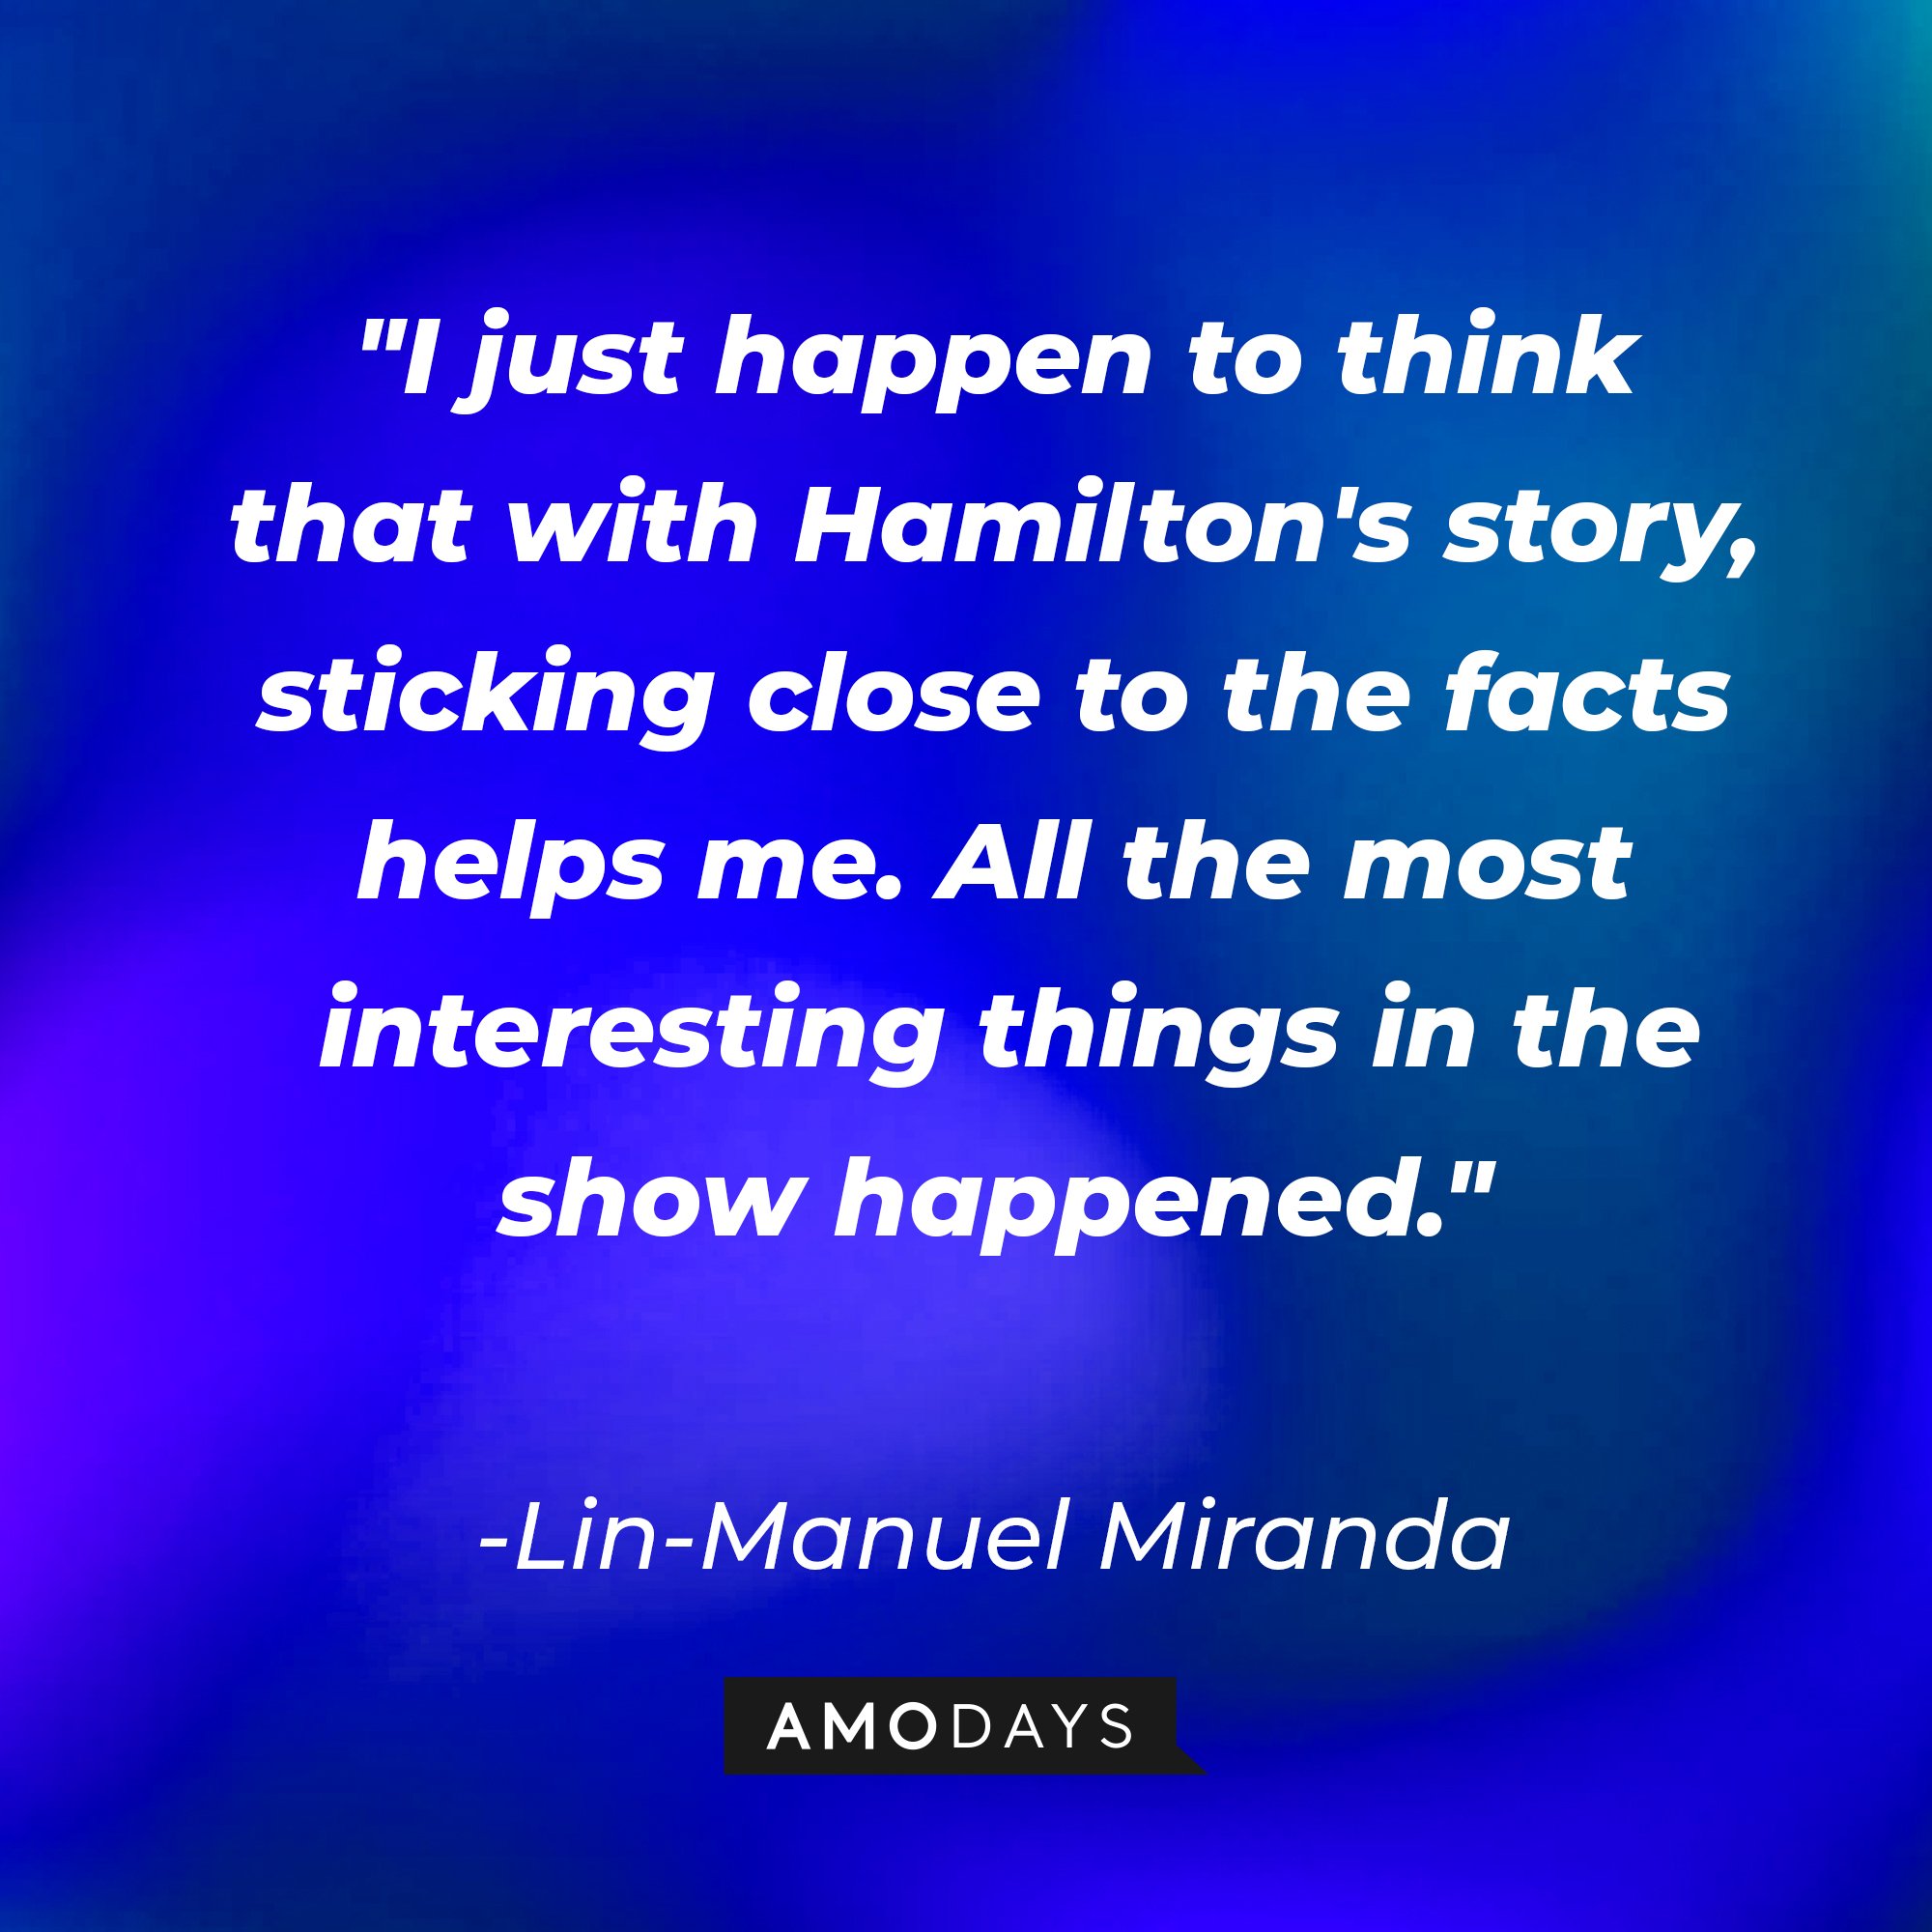 Lin-Manuel Miranda's quote: "I just happen to think that with Hamilton's story, sticking close to the facts helps me. All the most interesting things in the show happened." | Image: AmoDays